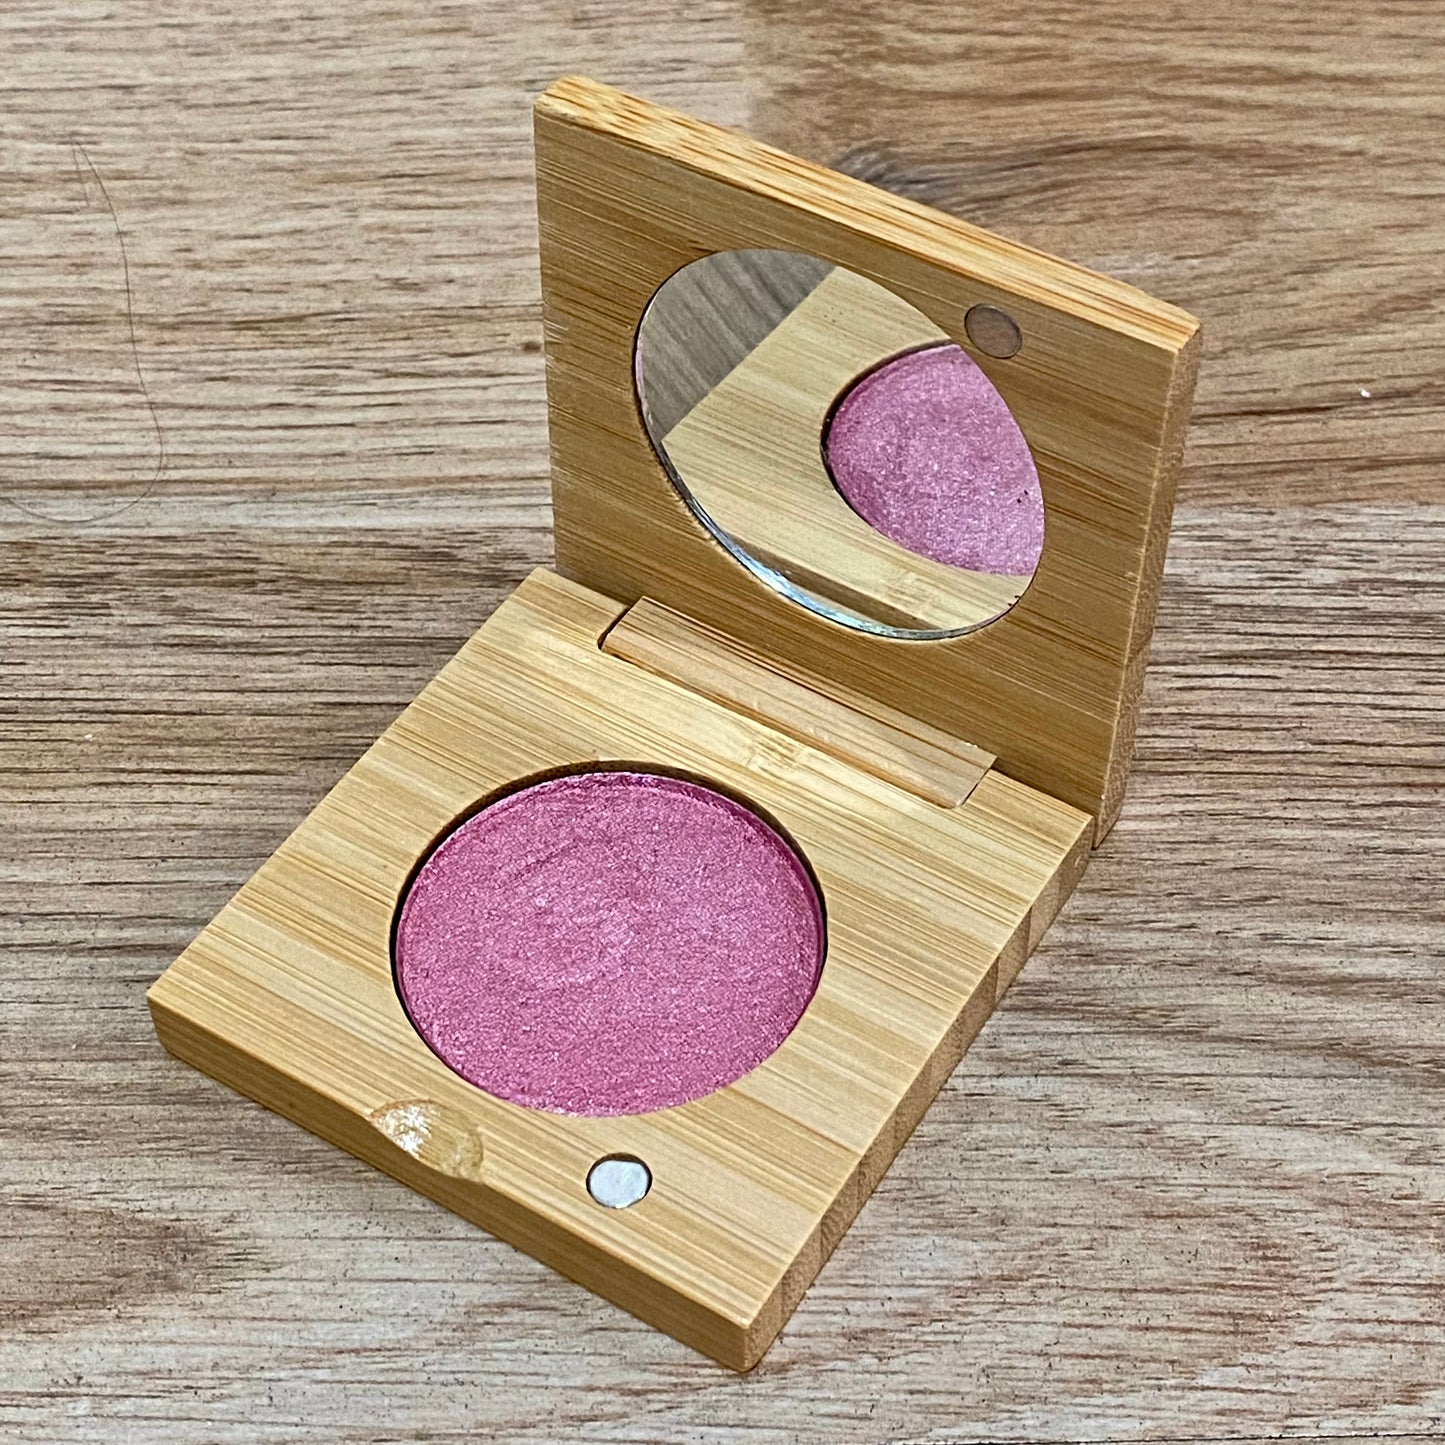 Pressed Mineral Blush by Zerra & Co